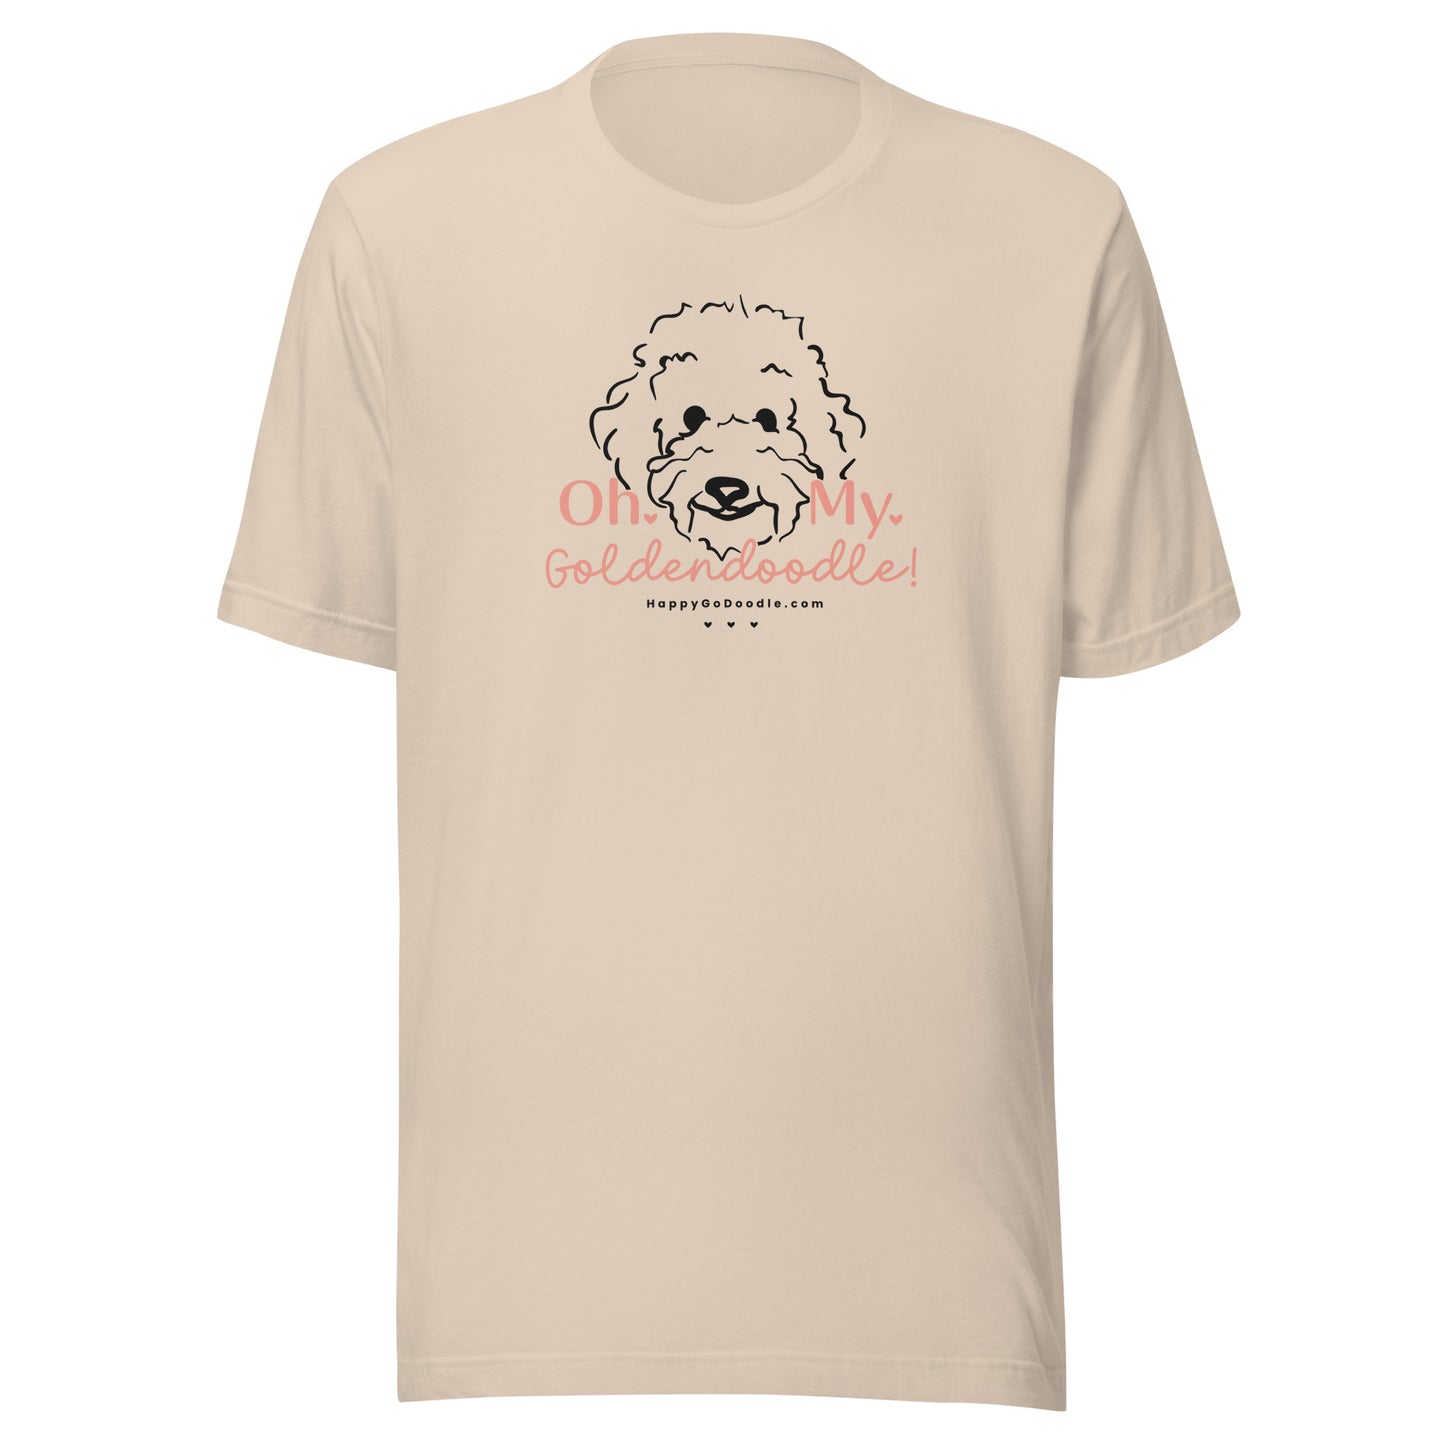 Goldendoodle t-shirt with Goldendoodle dog face and words "Oh My Goldendoodle" in cream color